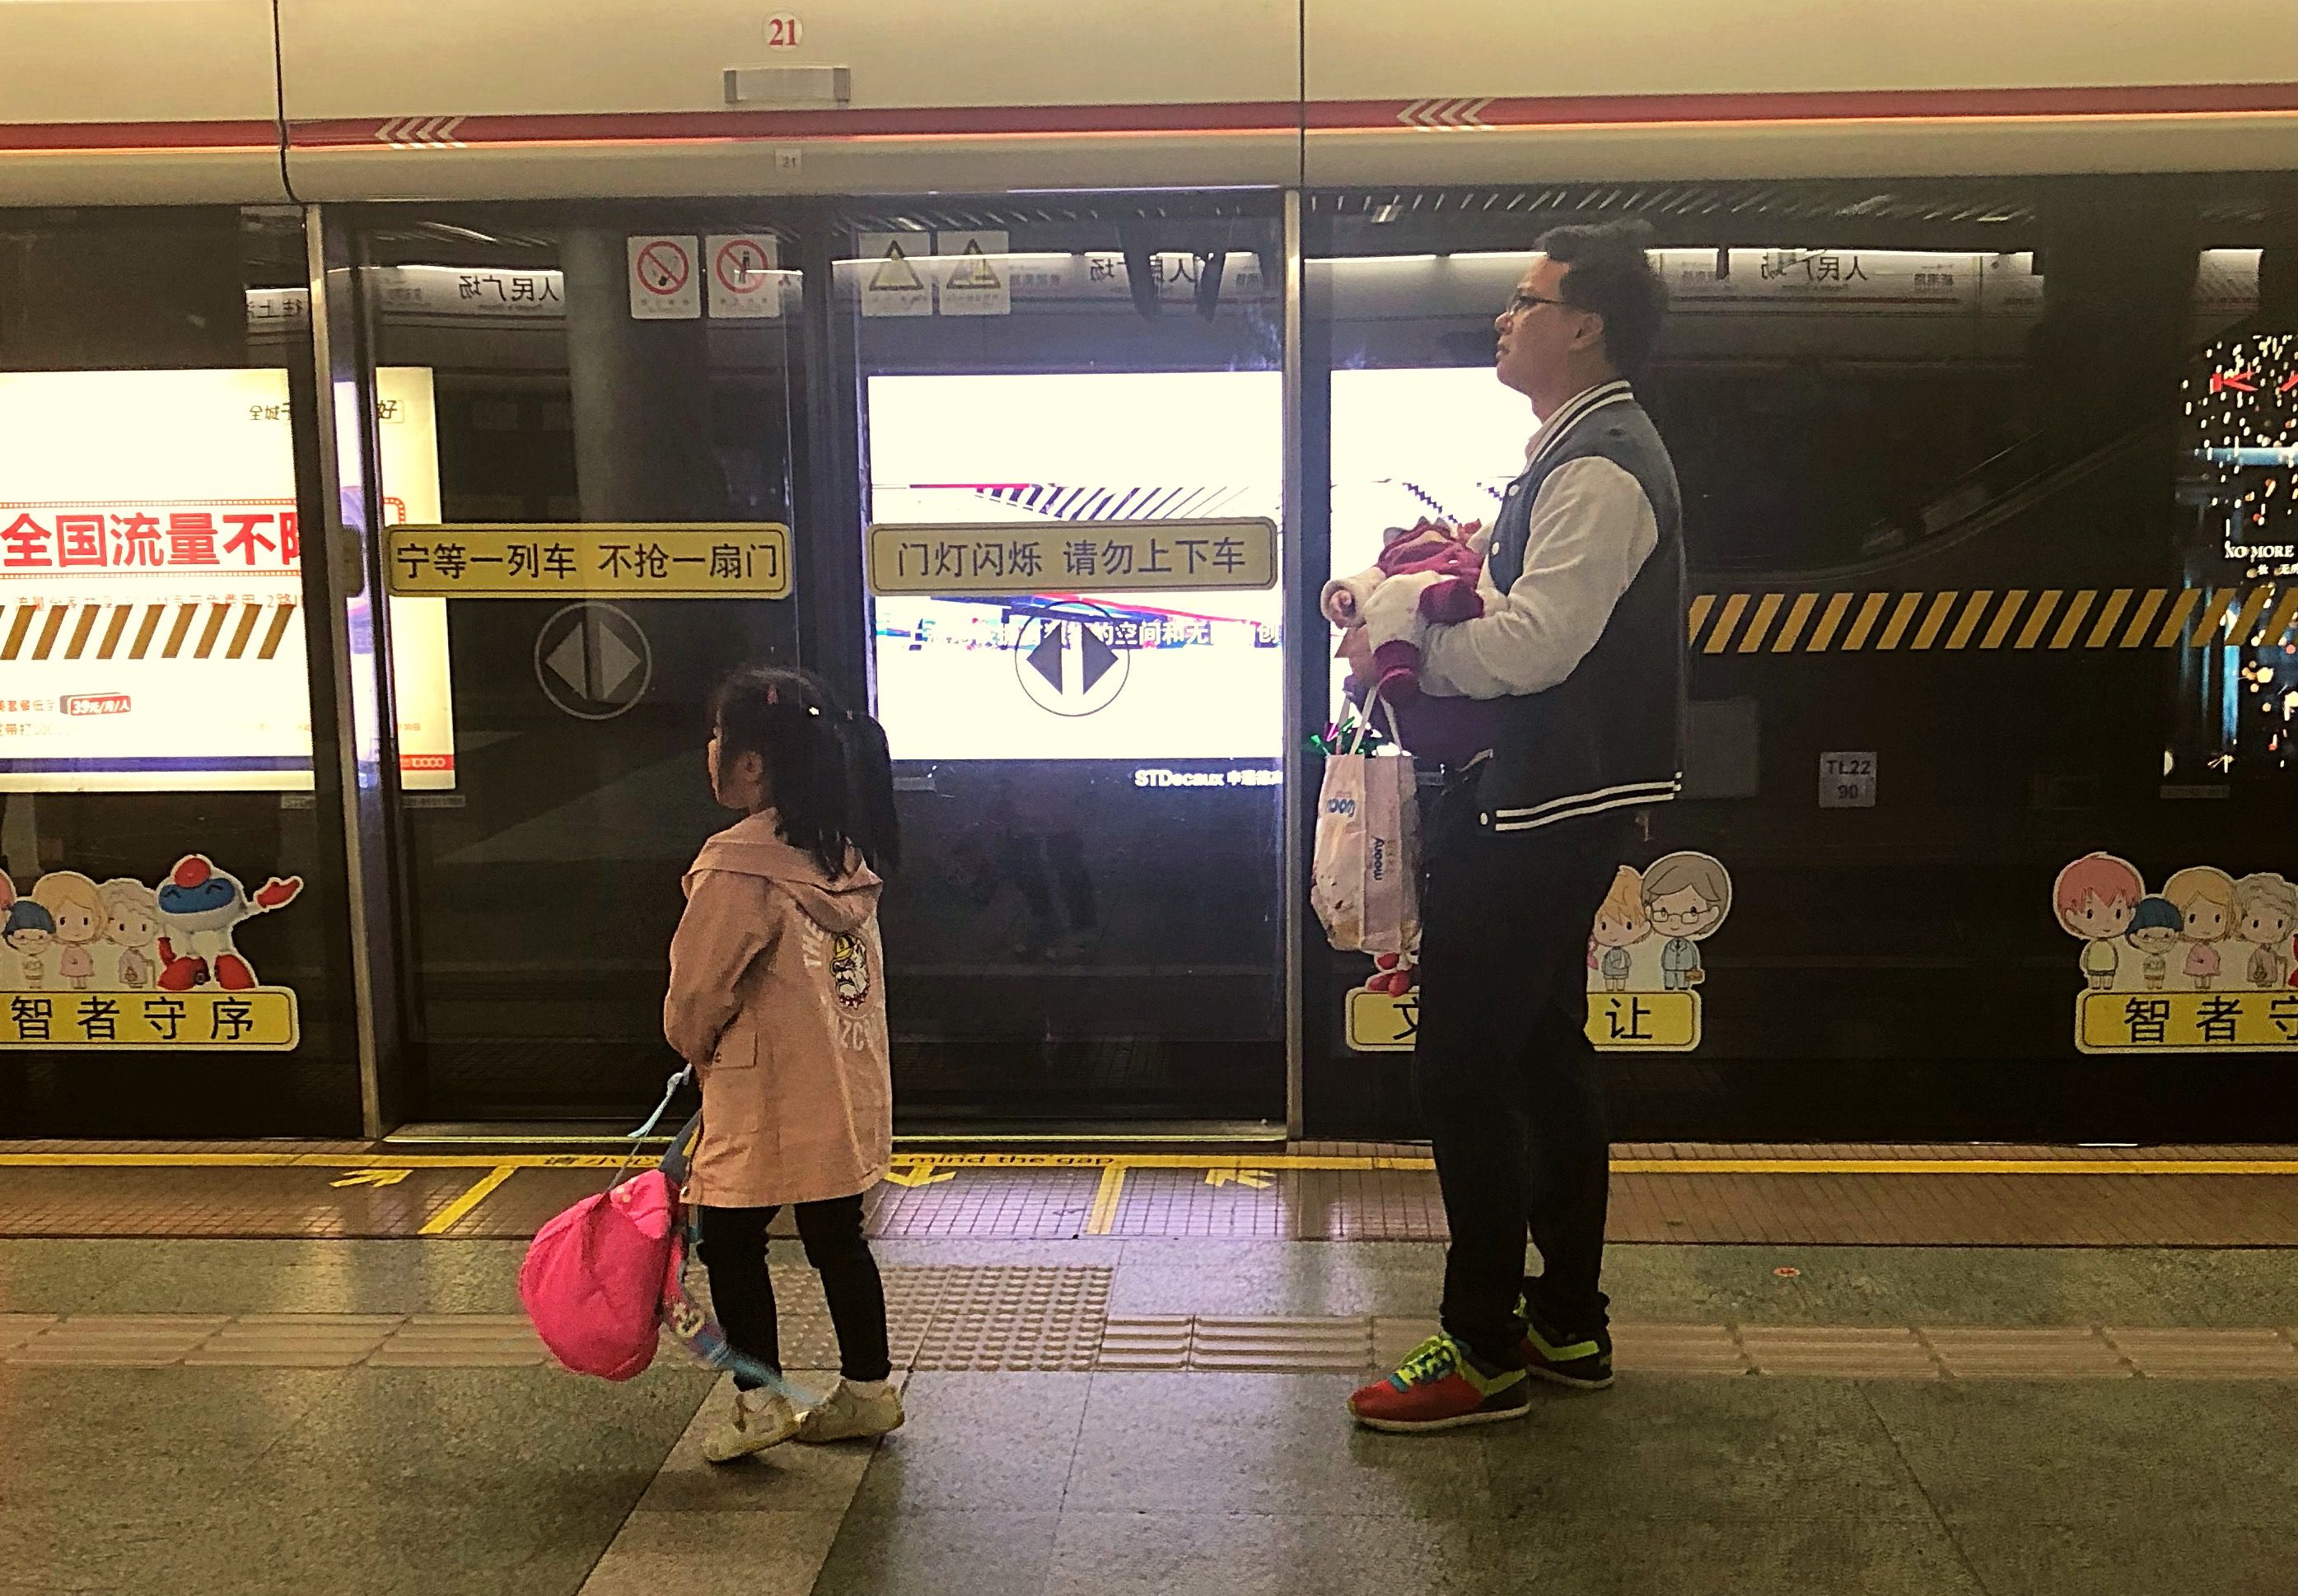 Waiting for the train in Shanghai. Image by Argentina Maria-Vanderhorst. China, 2018.